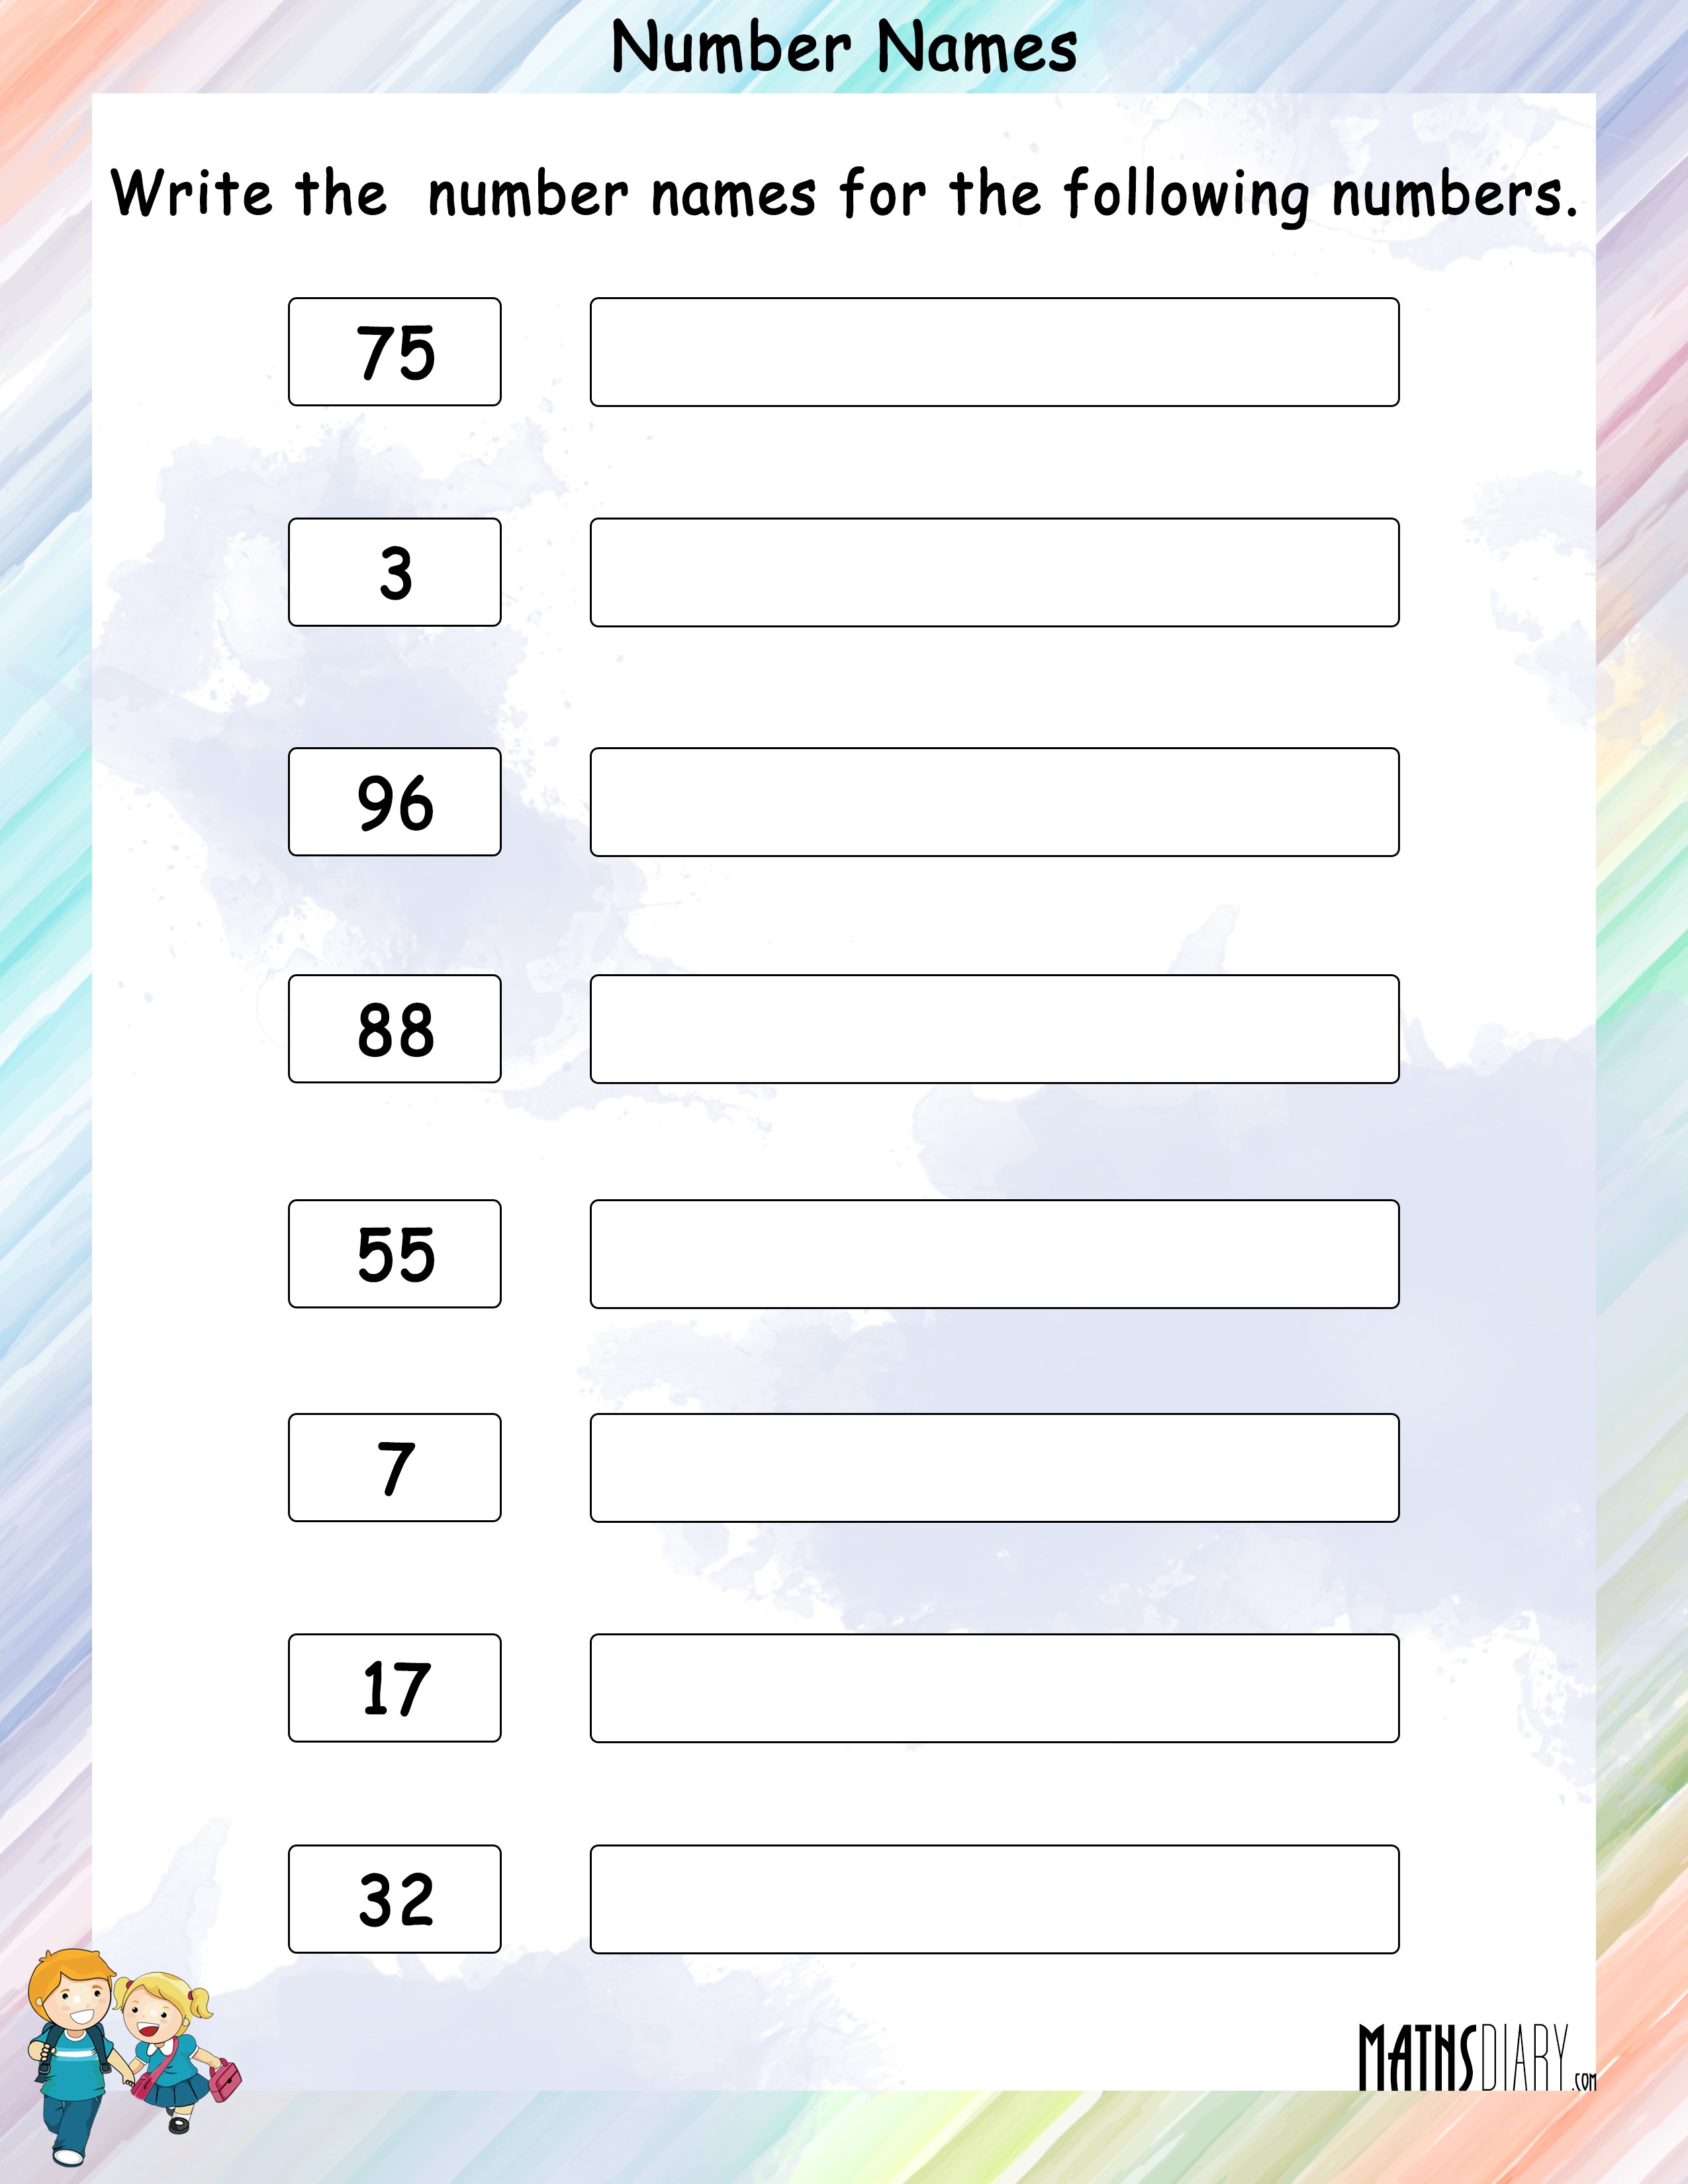 Write Number Names For Given Numbers Math Worksheets MathsDiary